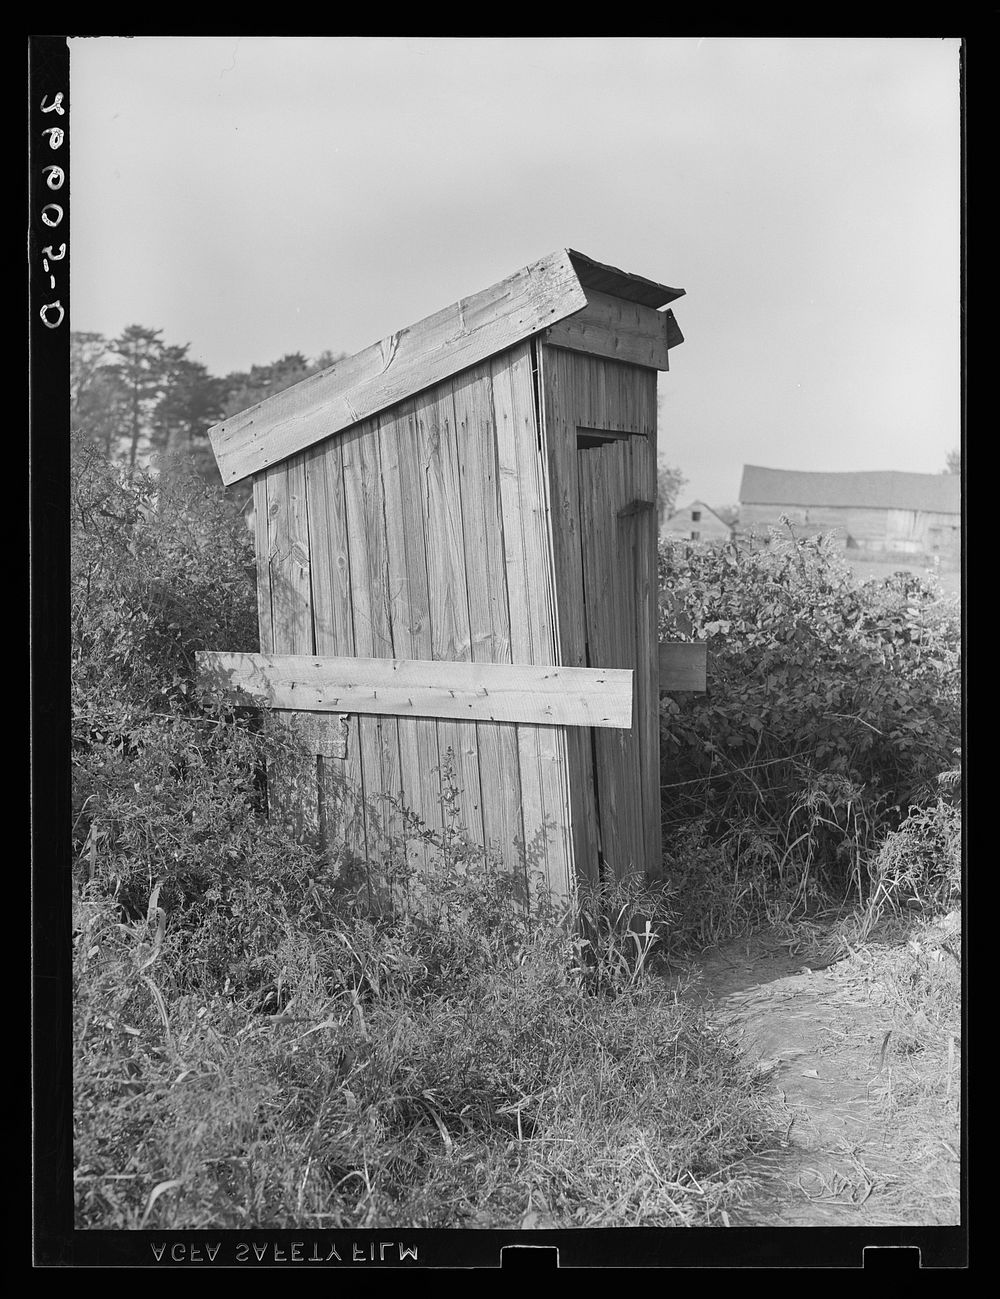 Portable privy used by over 200 cranberry pickers. Burlington County, New Jersey. Sourced from the Library of Congress.